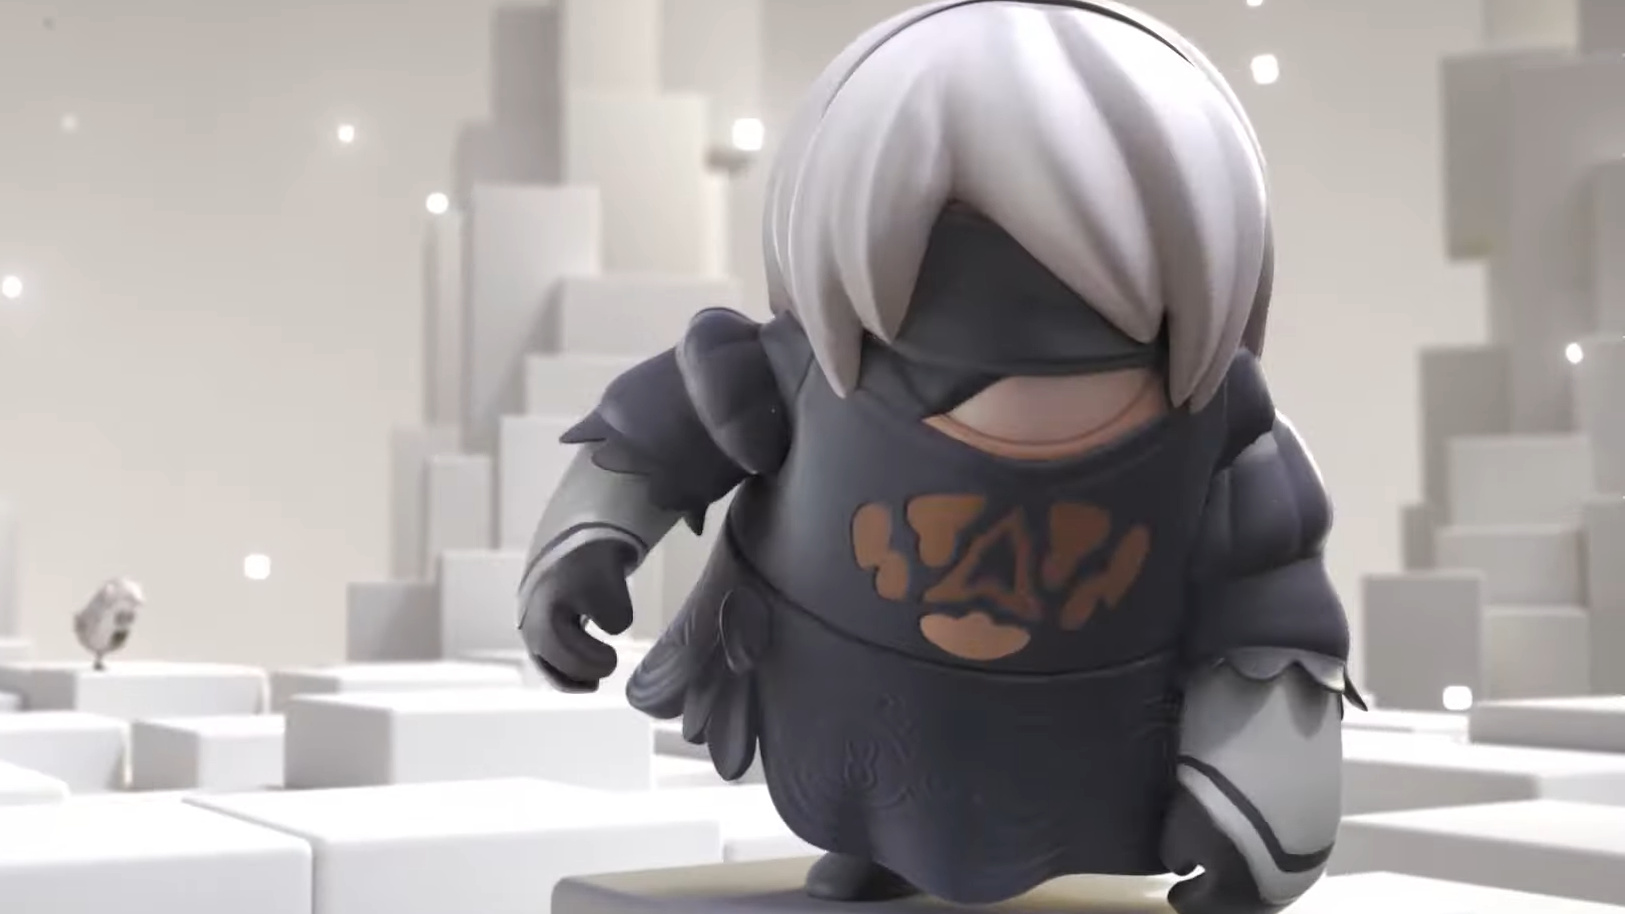 2b From Nier Automata Is Coming To Fall Guys Ultimate Knockout Nintendo Life